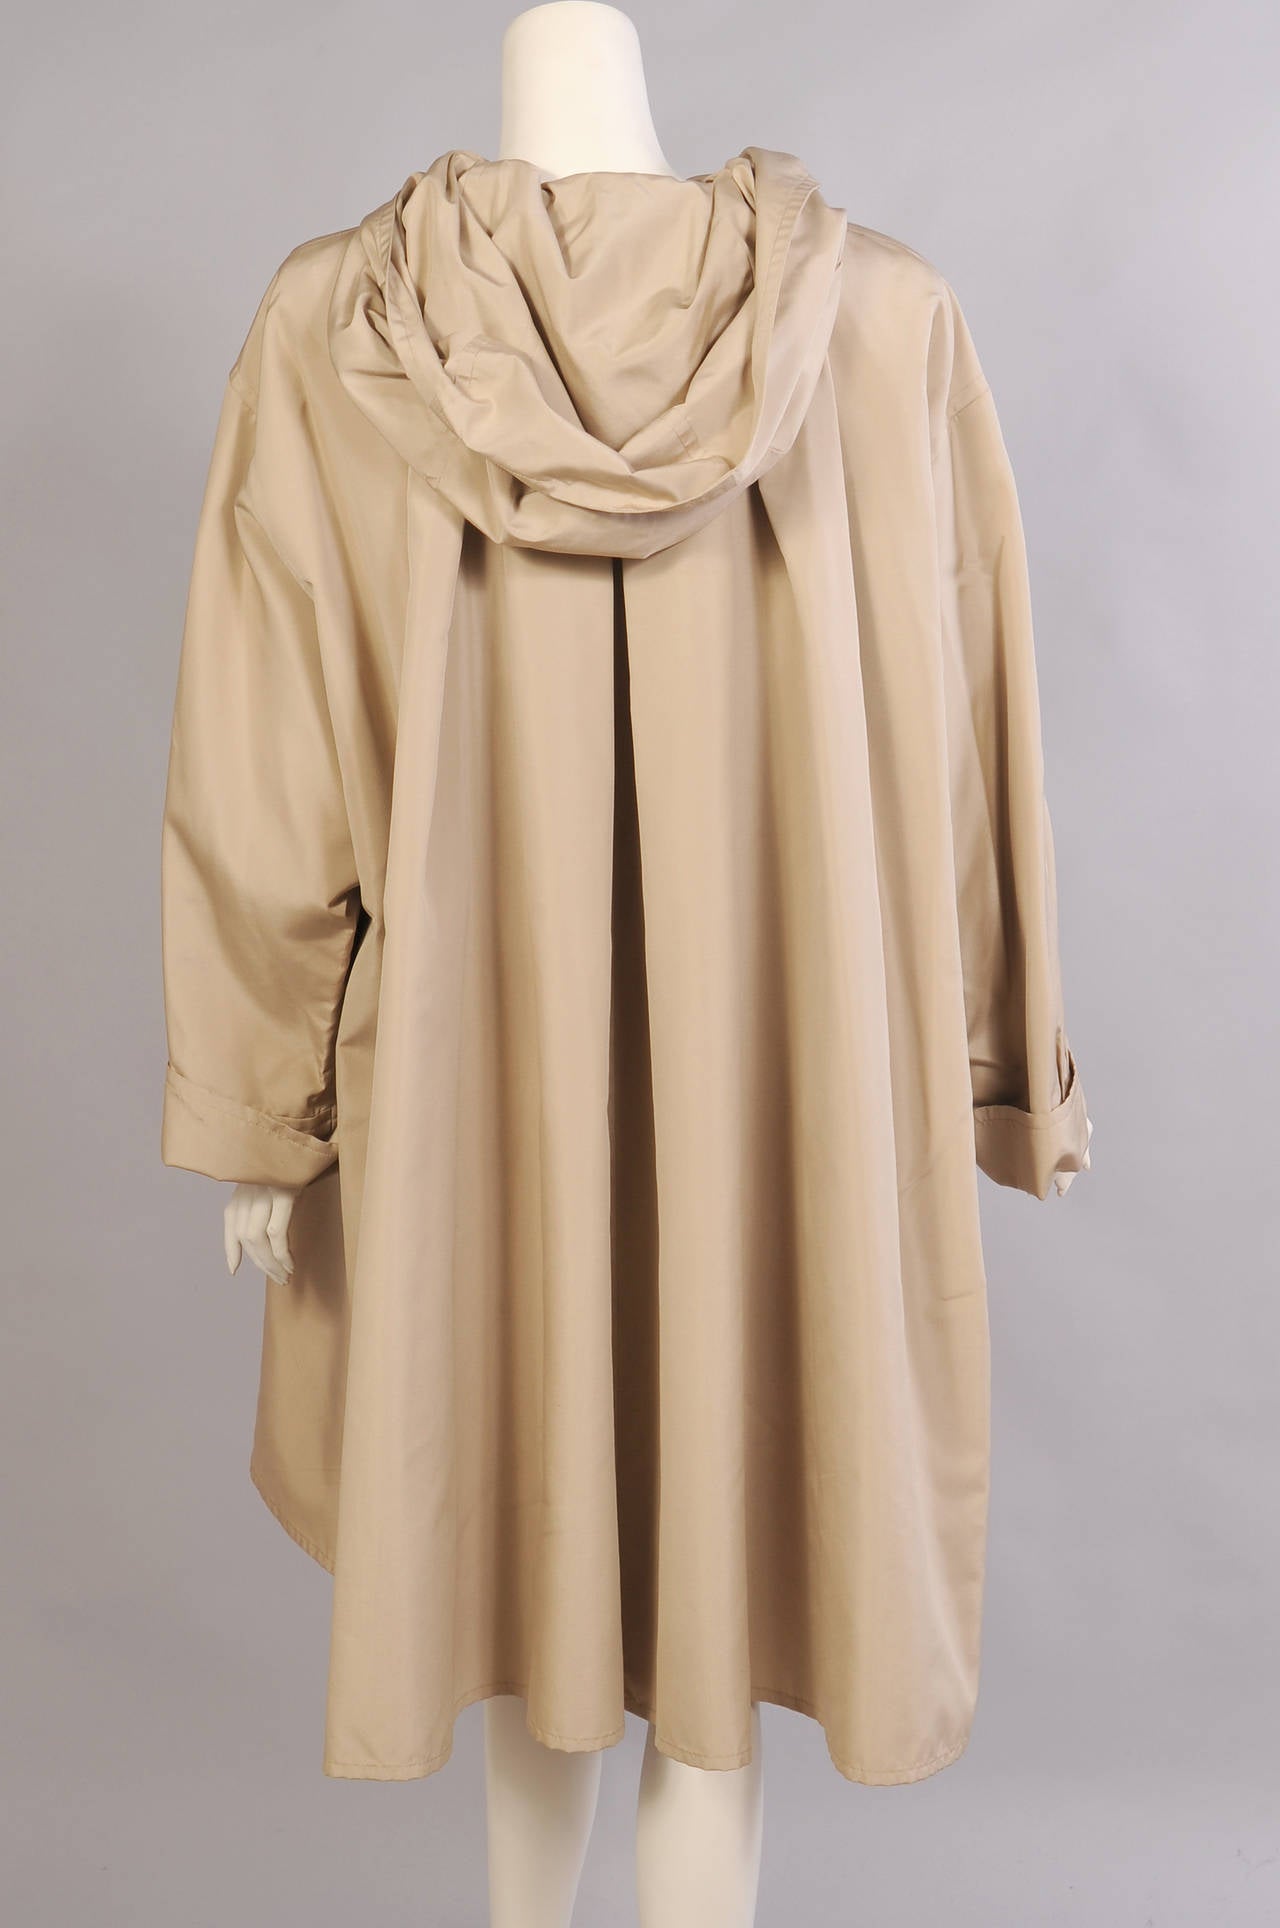 Yves Saint Laurent Haute Couture Raincoat with a Hood In Excellent Condition In New Hope, PA